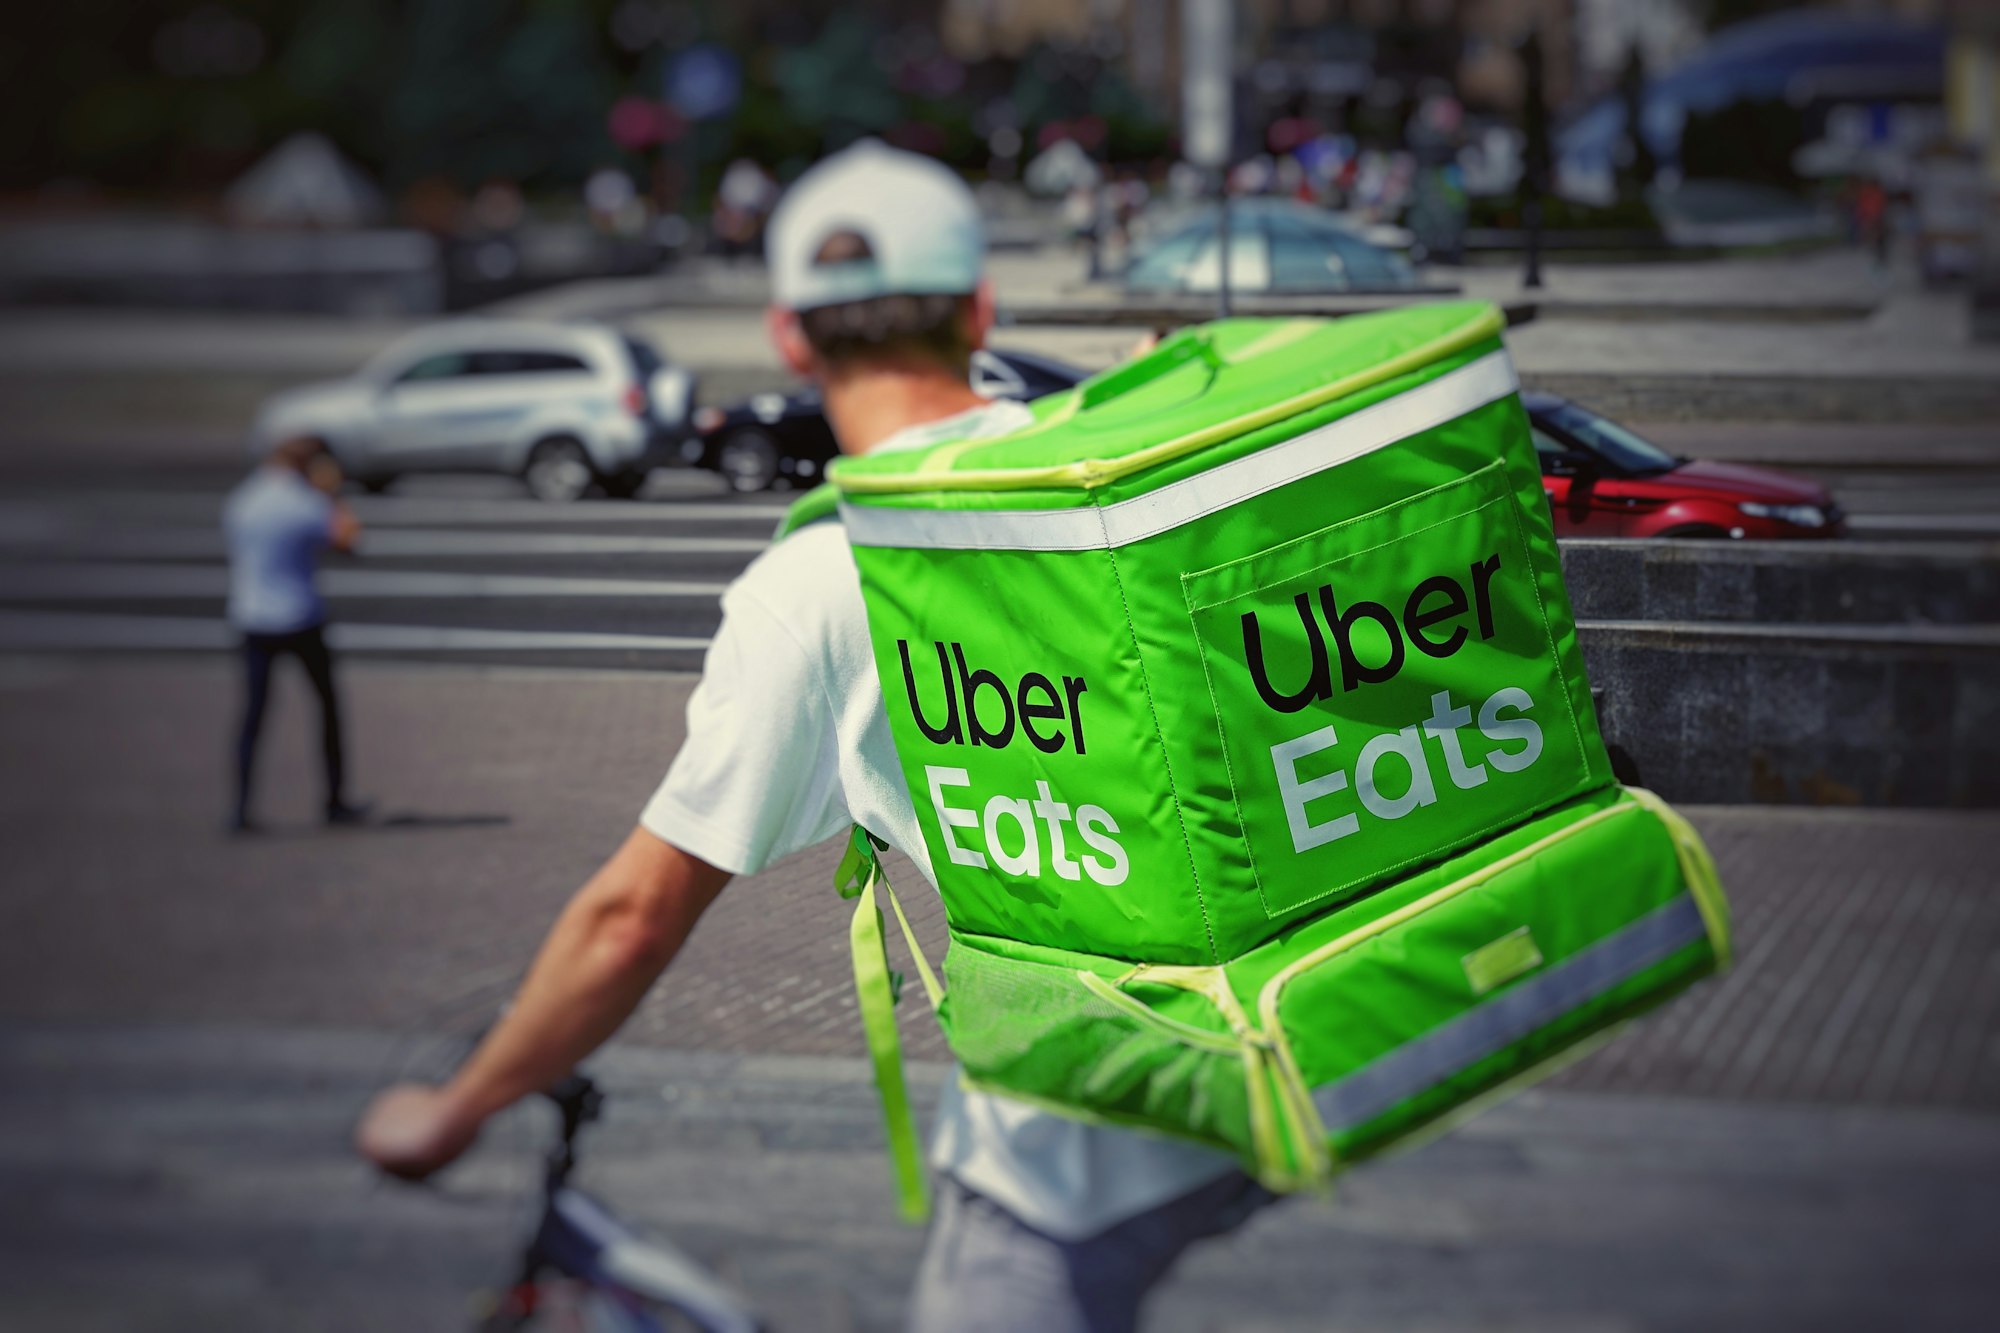 How Uber Eats experimentation culture led it to expand outside of food delivery